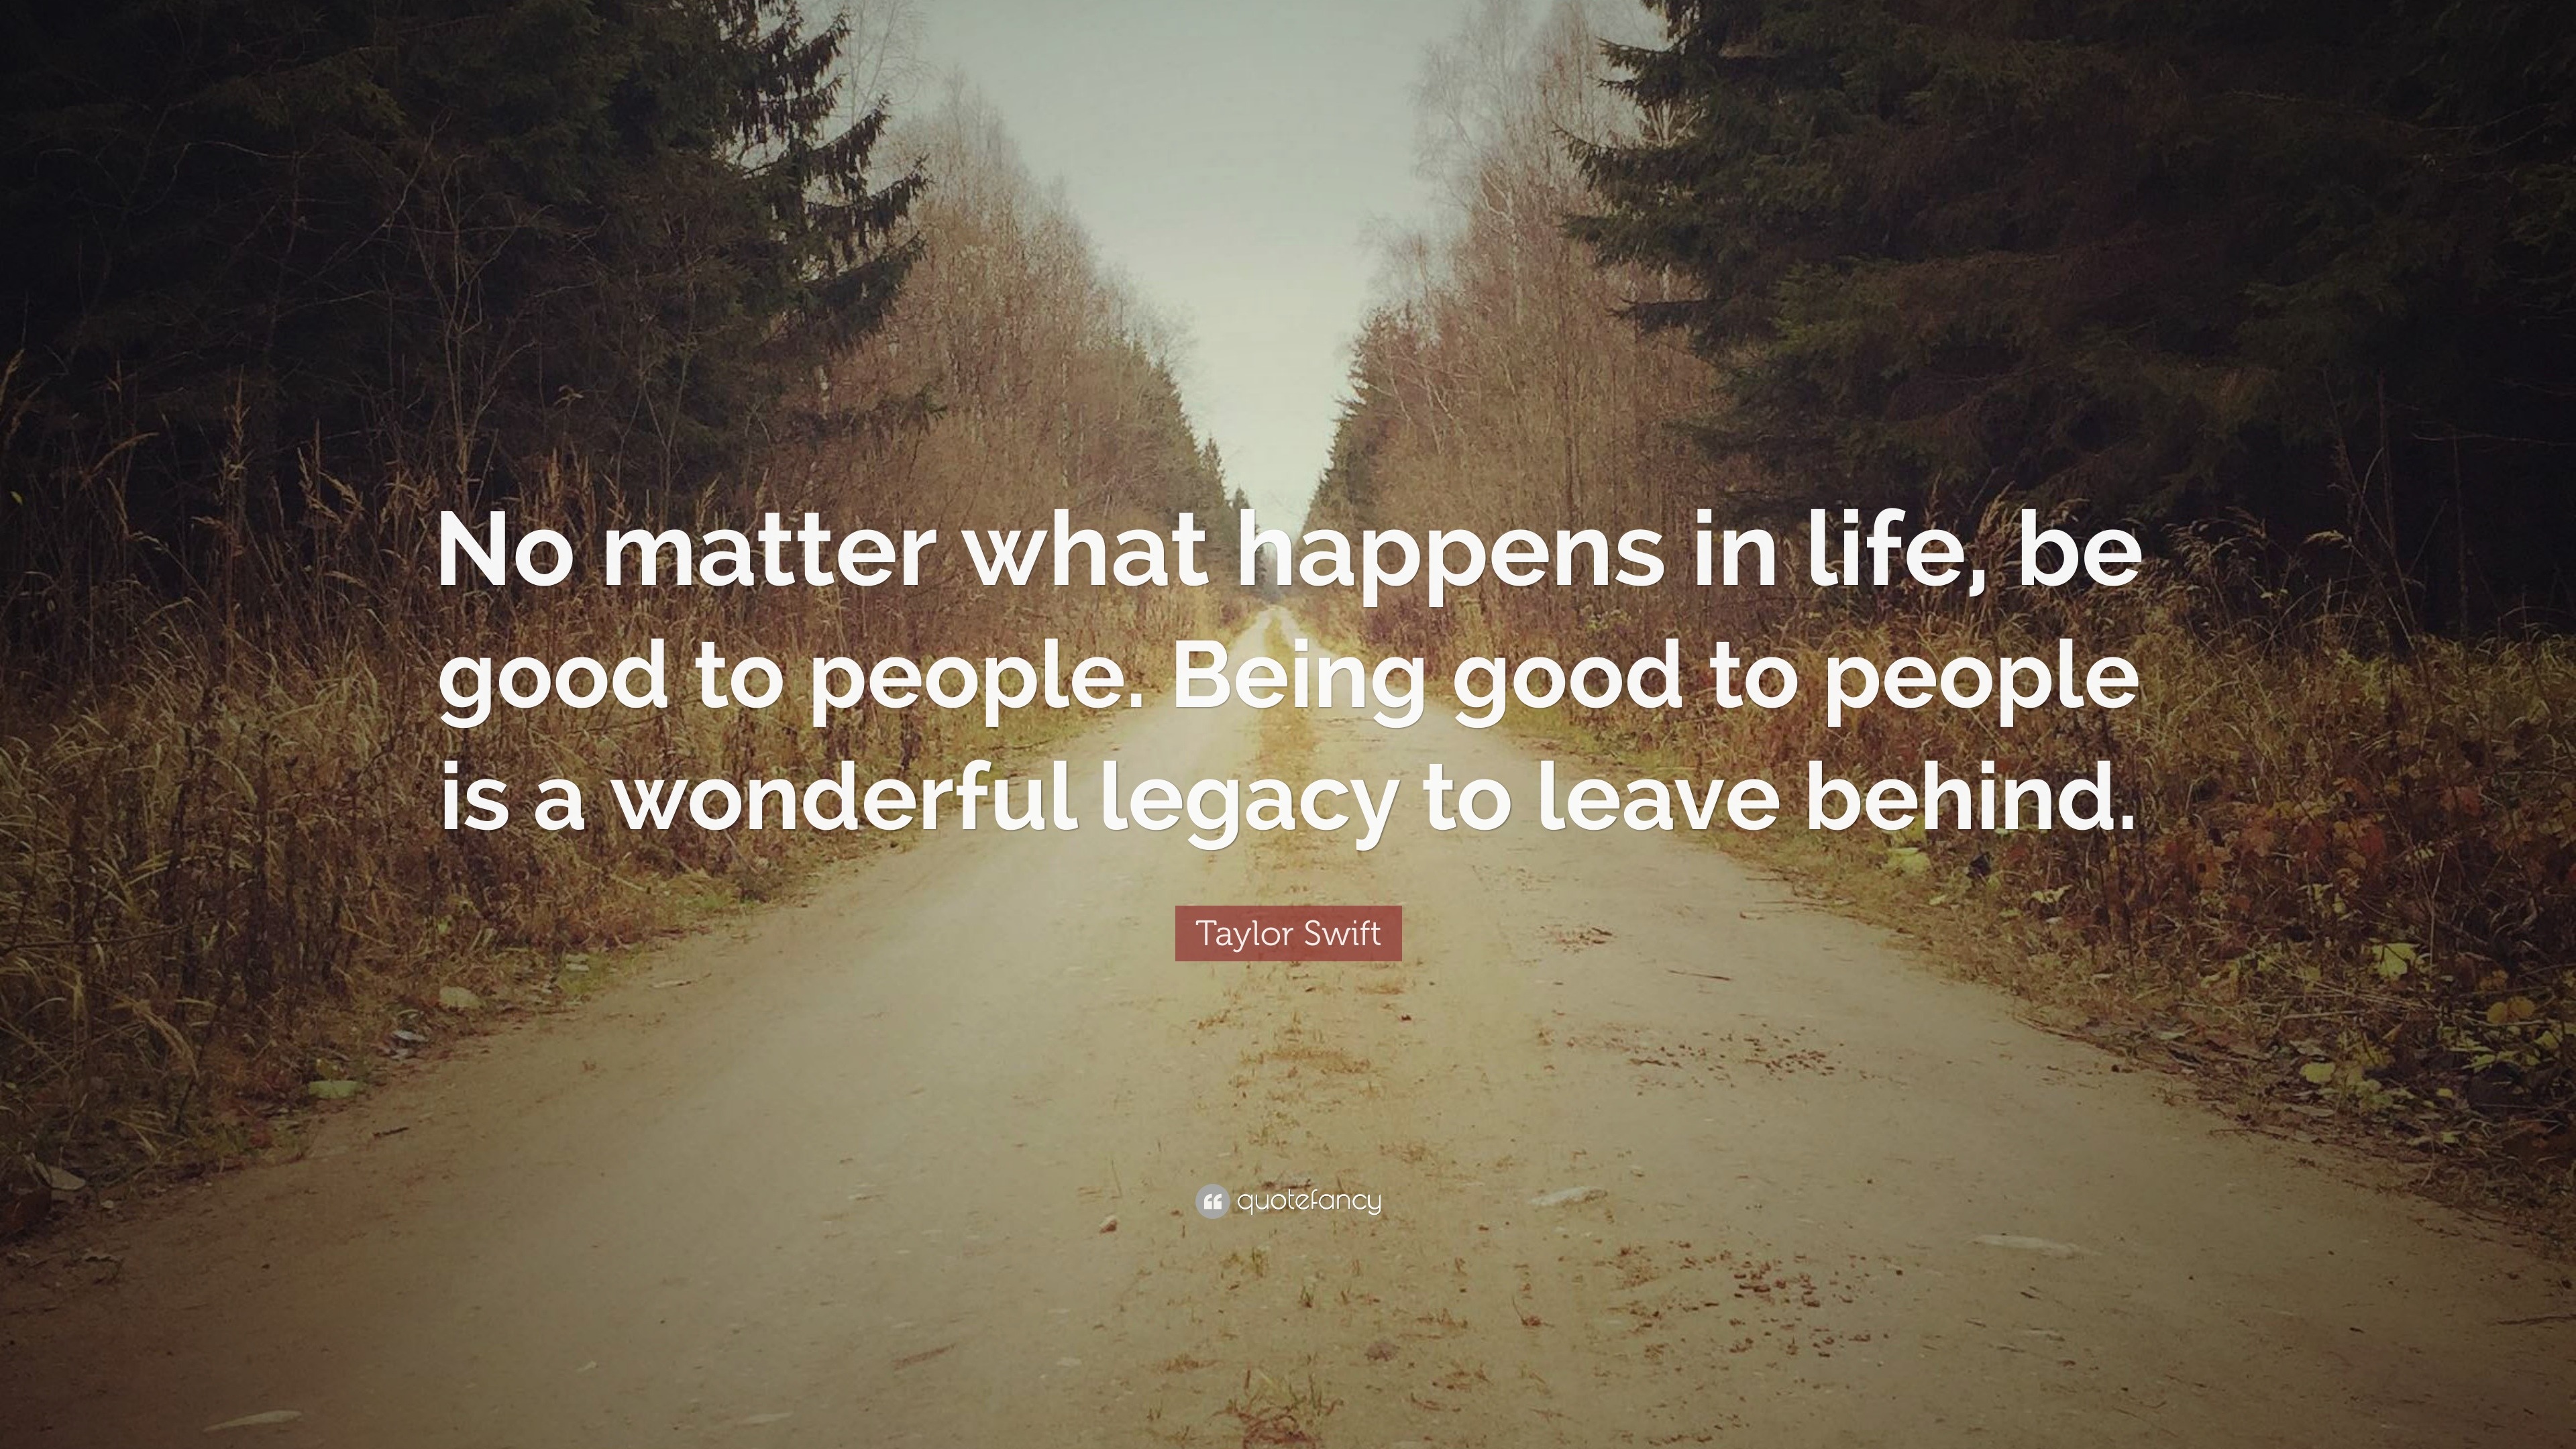 Taylor Swift Quote: “No matter what happens in life, be good to people ...